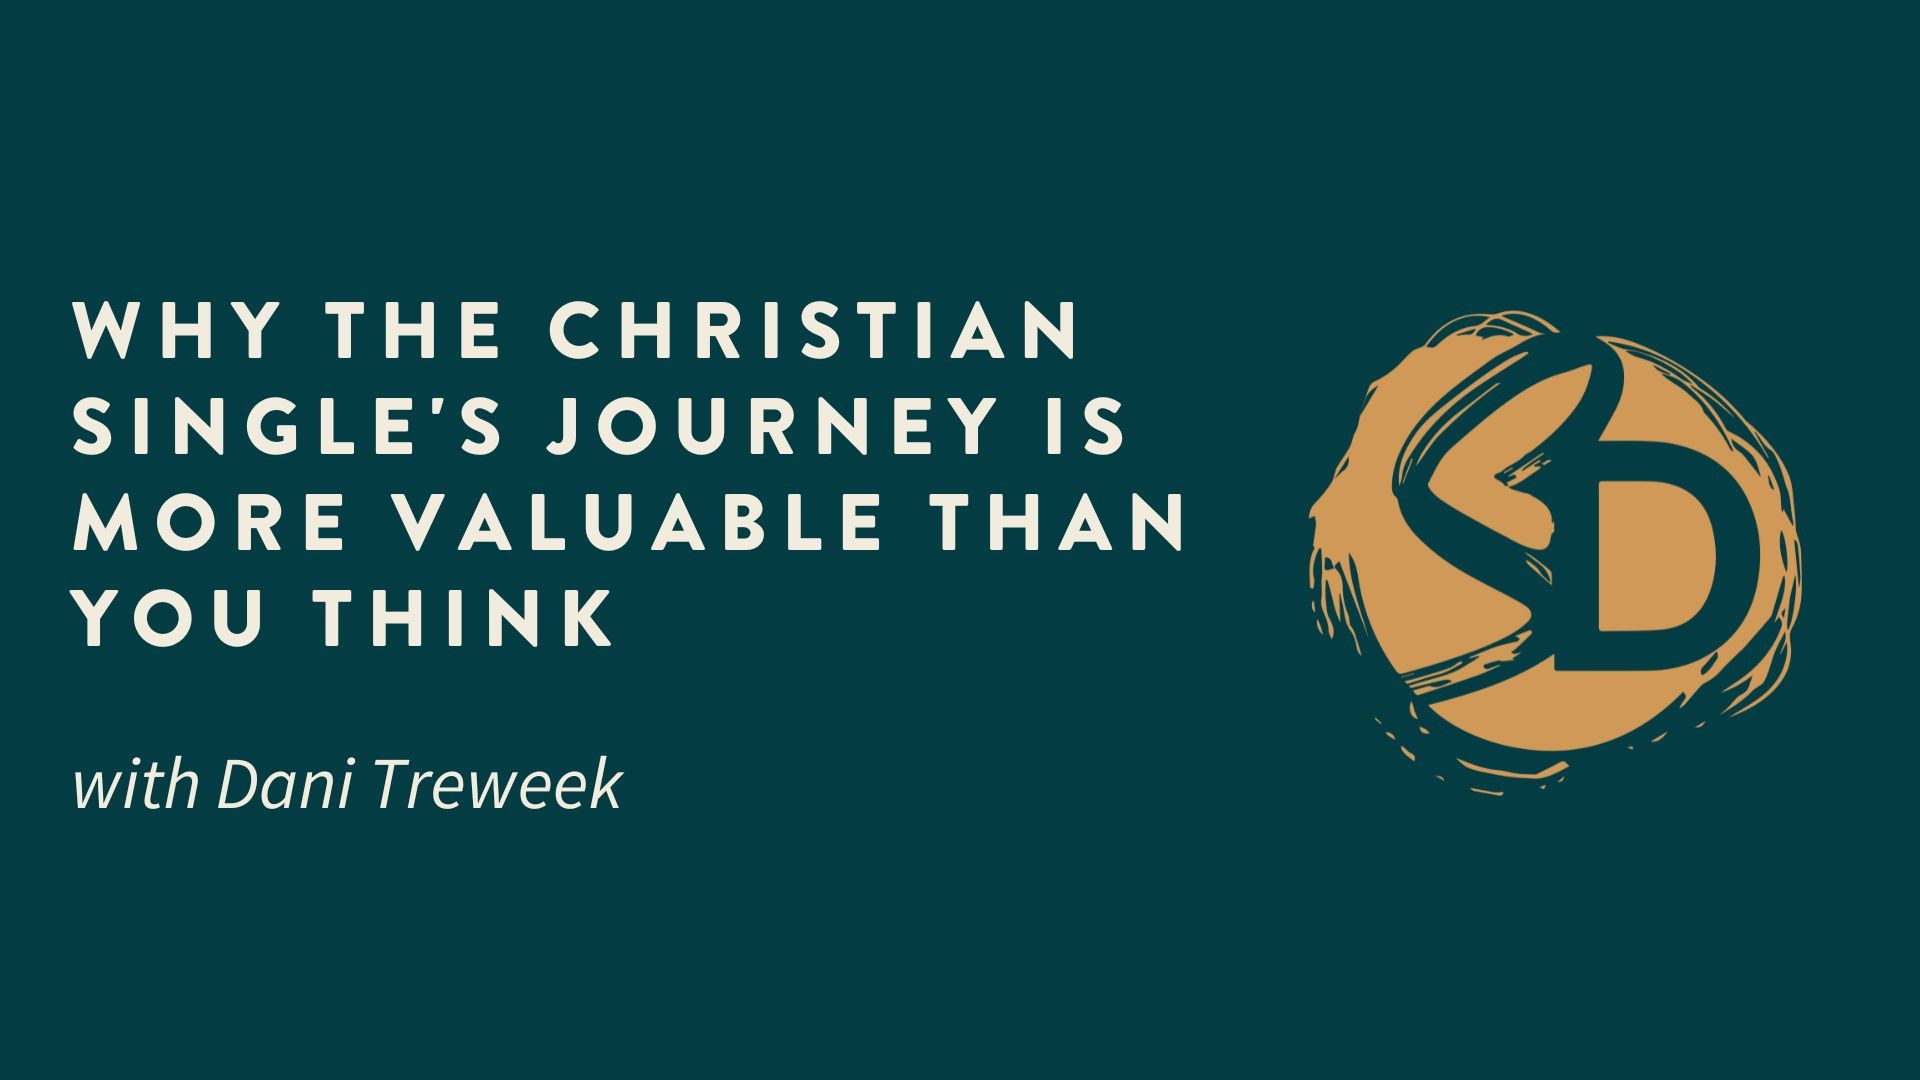 Why The Christian Single’s Journey is More Valuable Than You Think